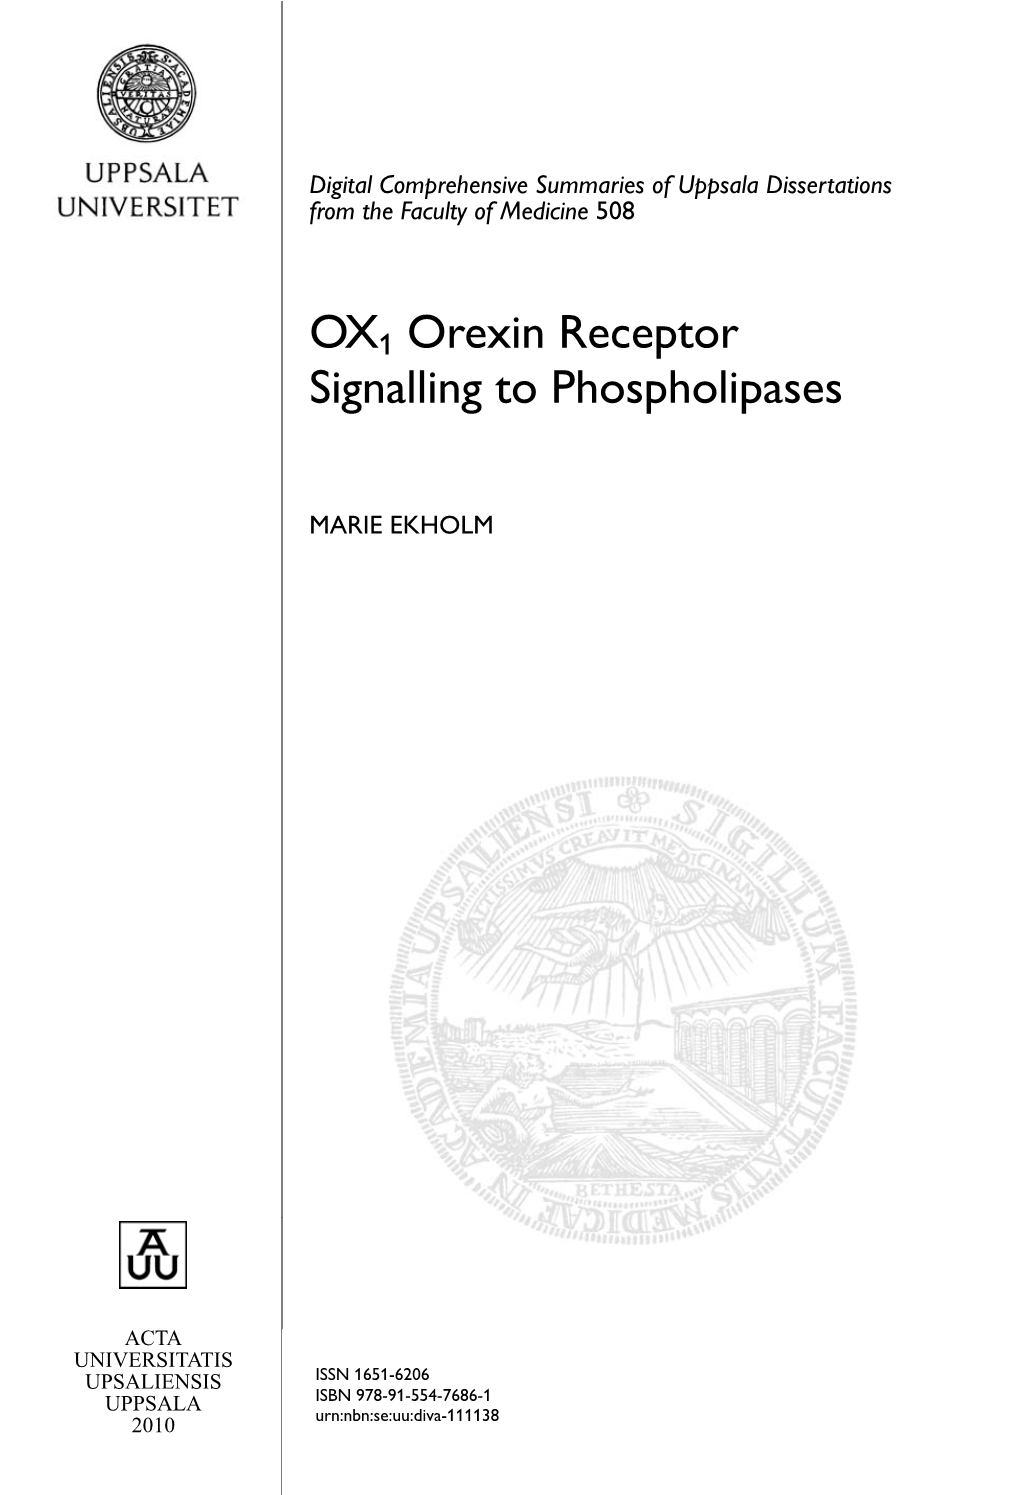 OX1 Orexin Receptor Signalling to Phospholipases